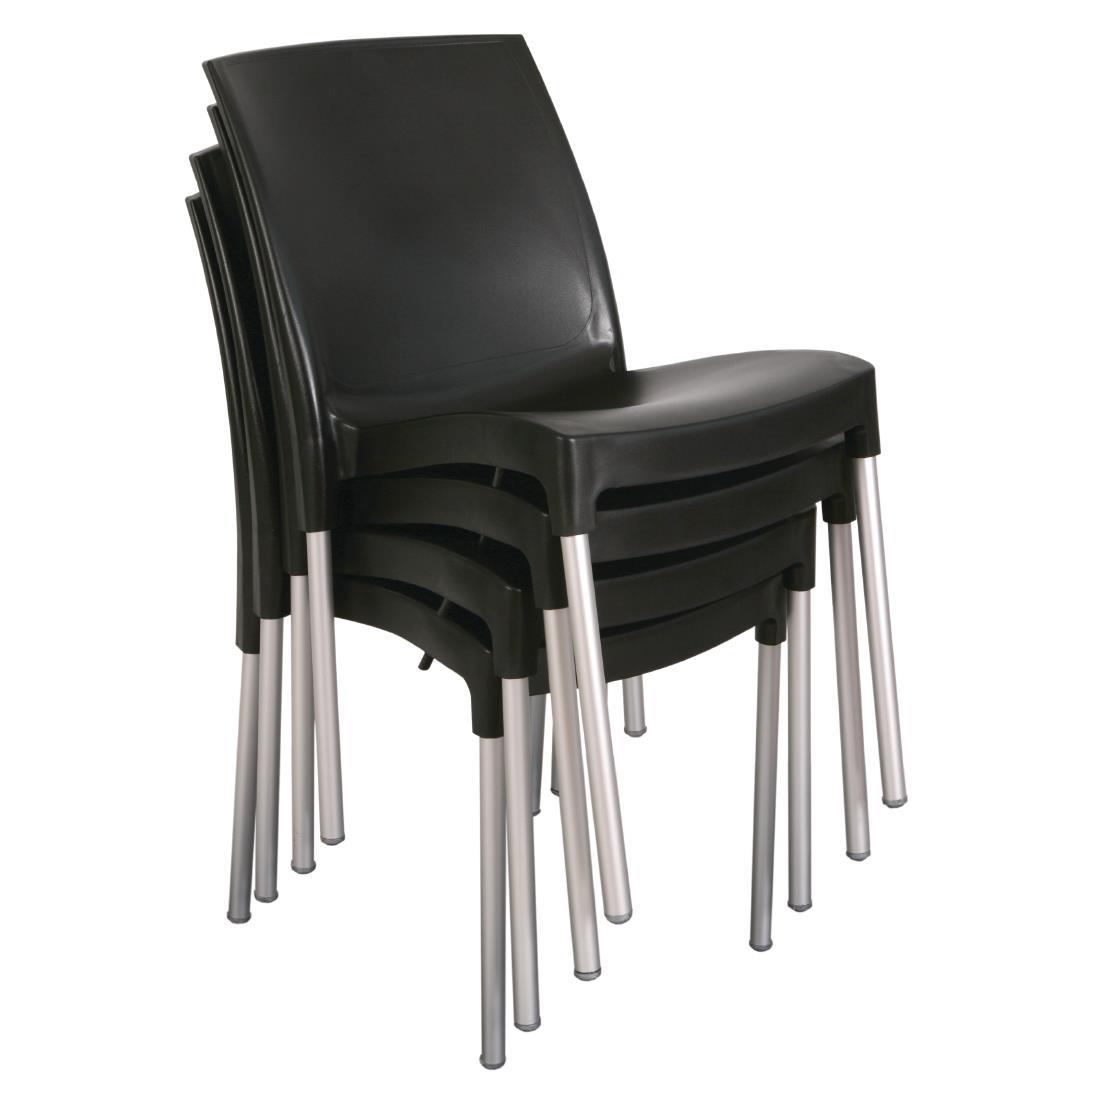 Bolero Stacking Bistro Side Chairs Black (Pack of 4) - GJ976  - 2